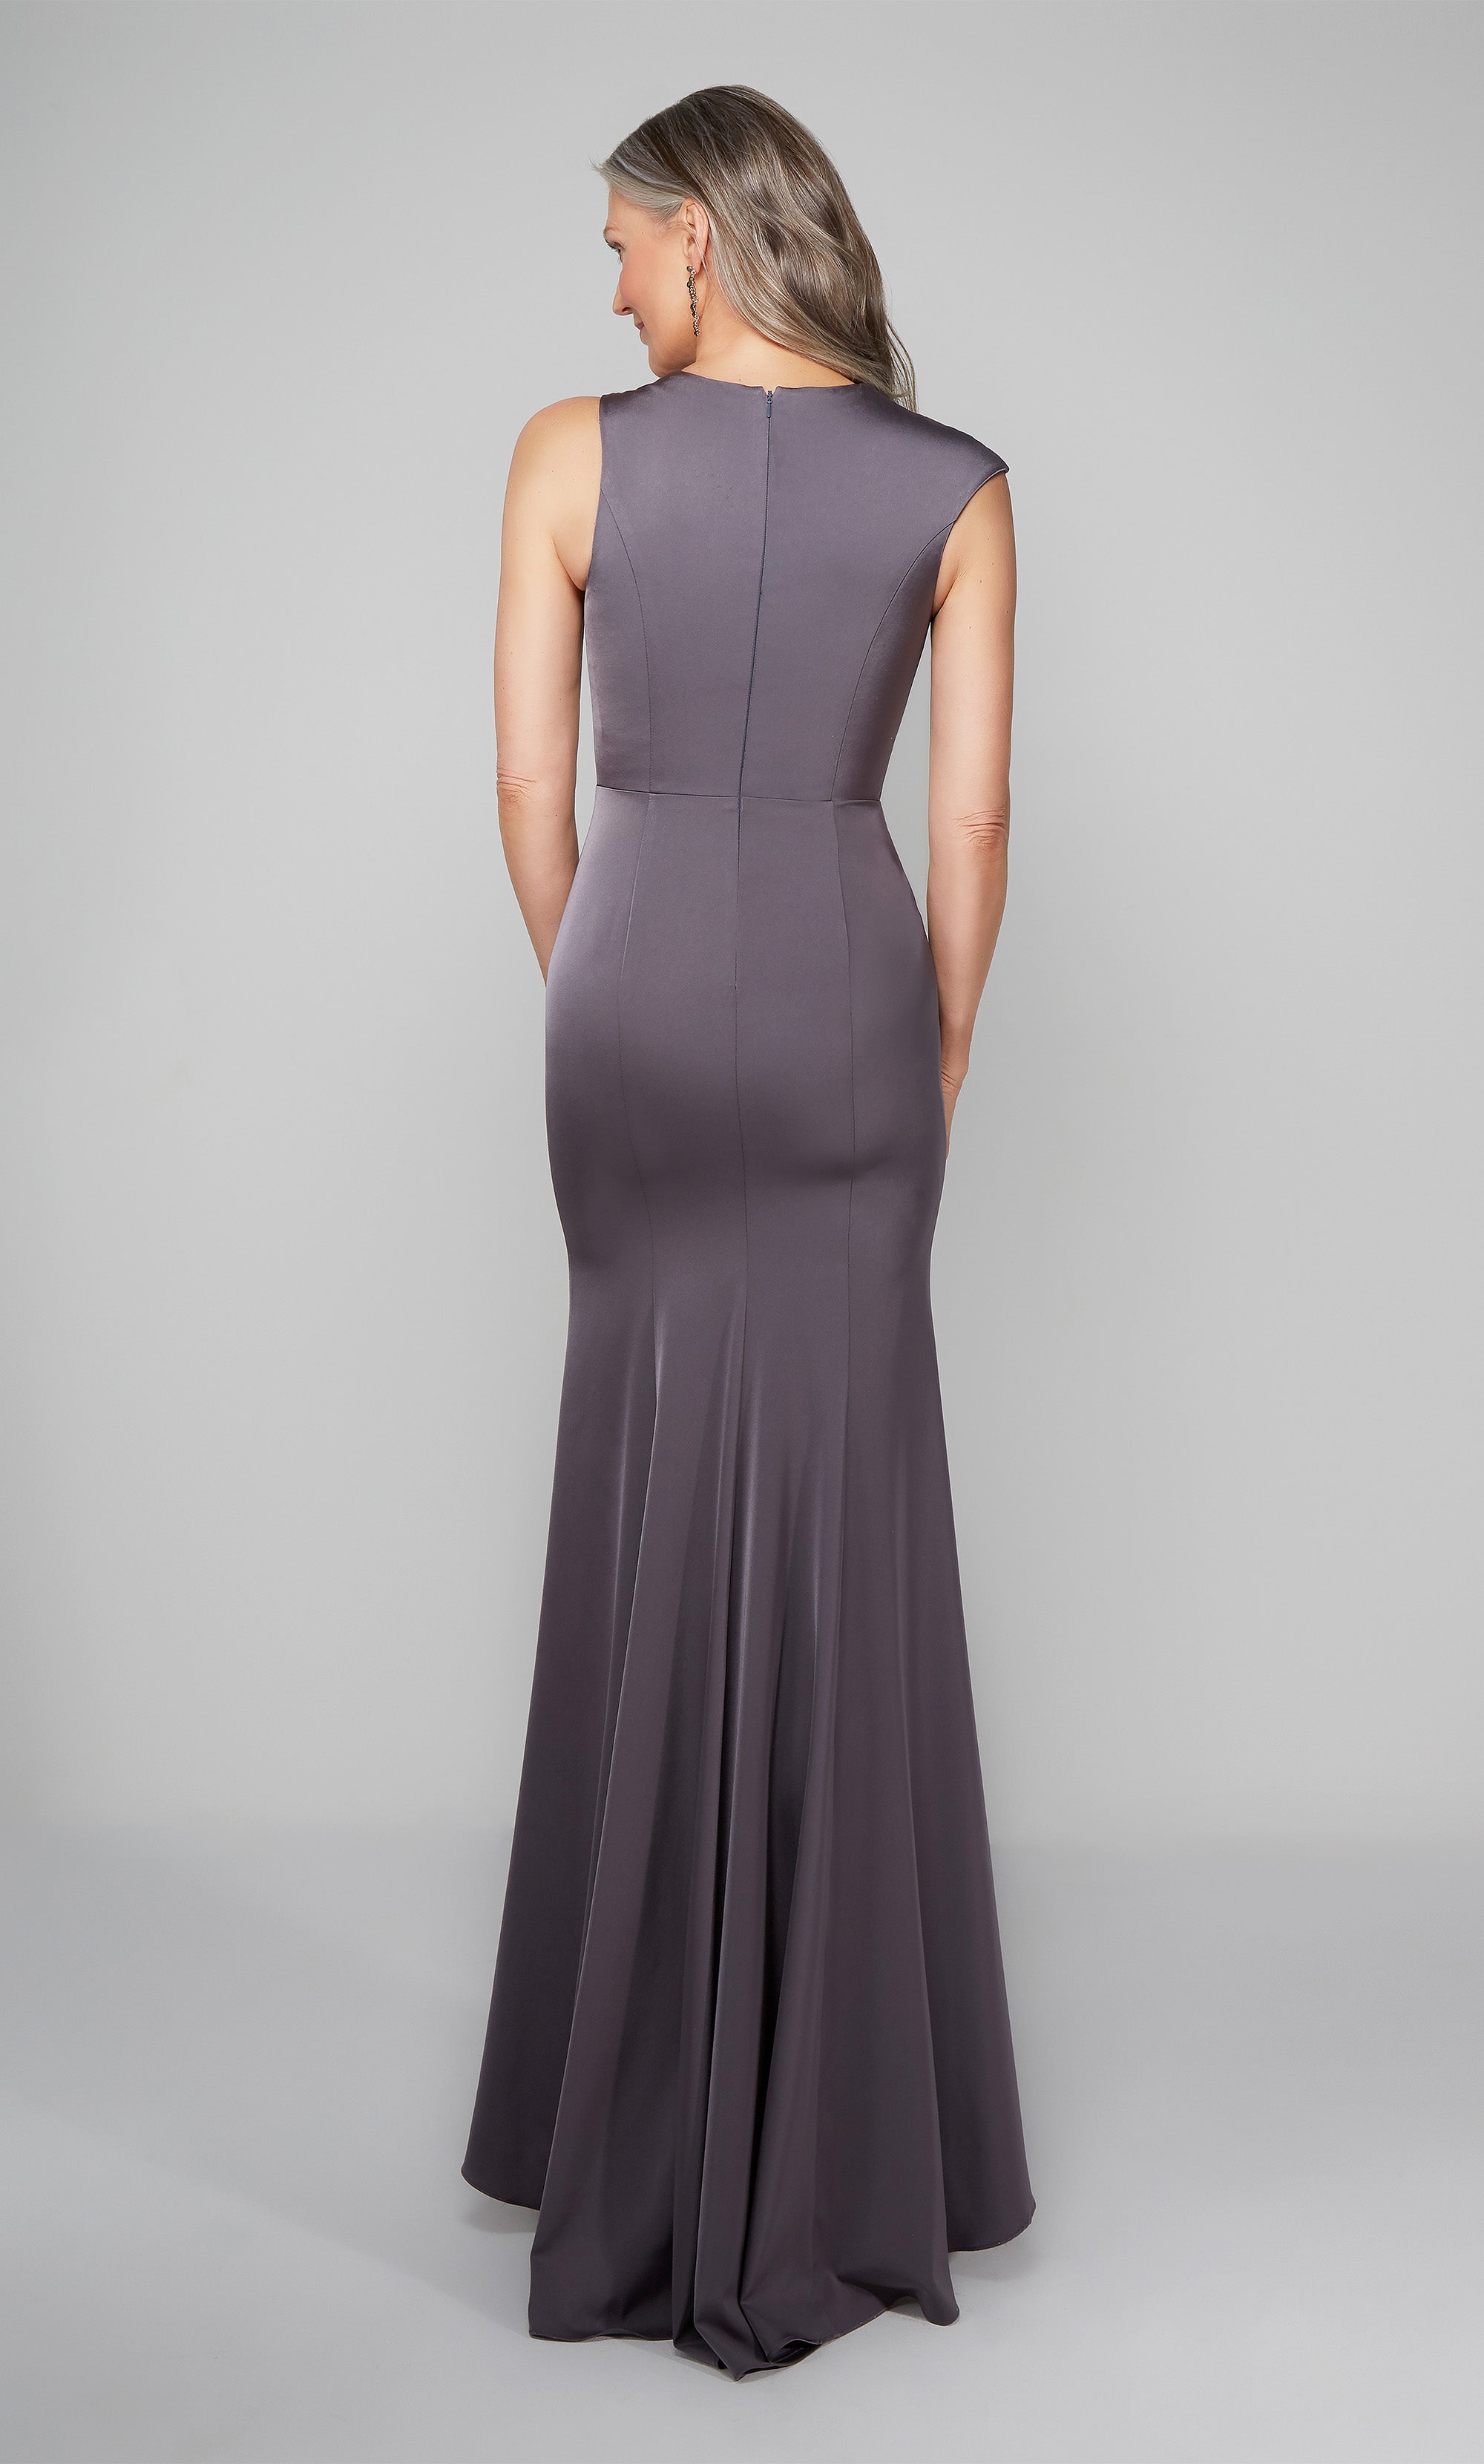 Simple mother of the bride dress with ruching detail on bodice in graphite color. Color-SWATCH_27598__GRAPHITE